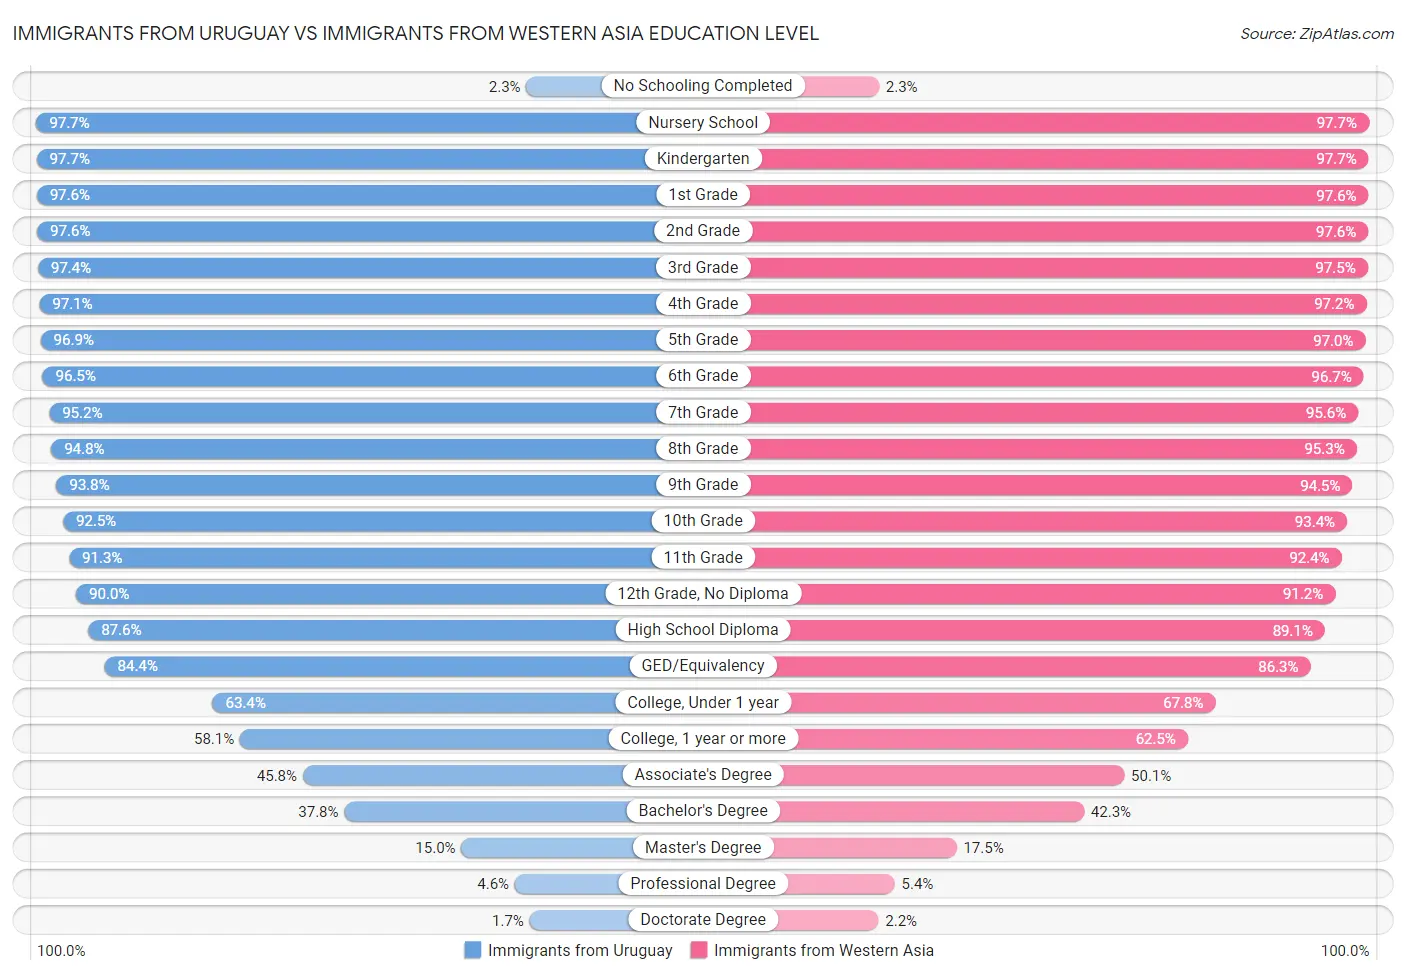 Immigrants from Uruguay vs Immigrants from Western Asia Education Level